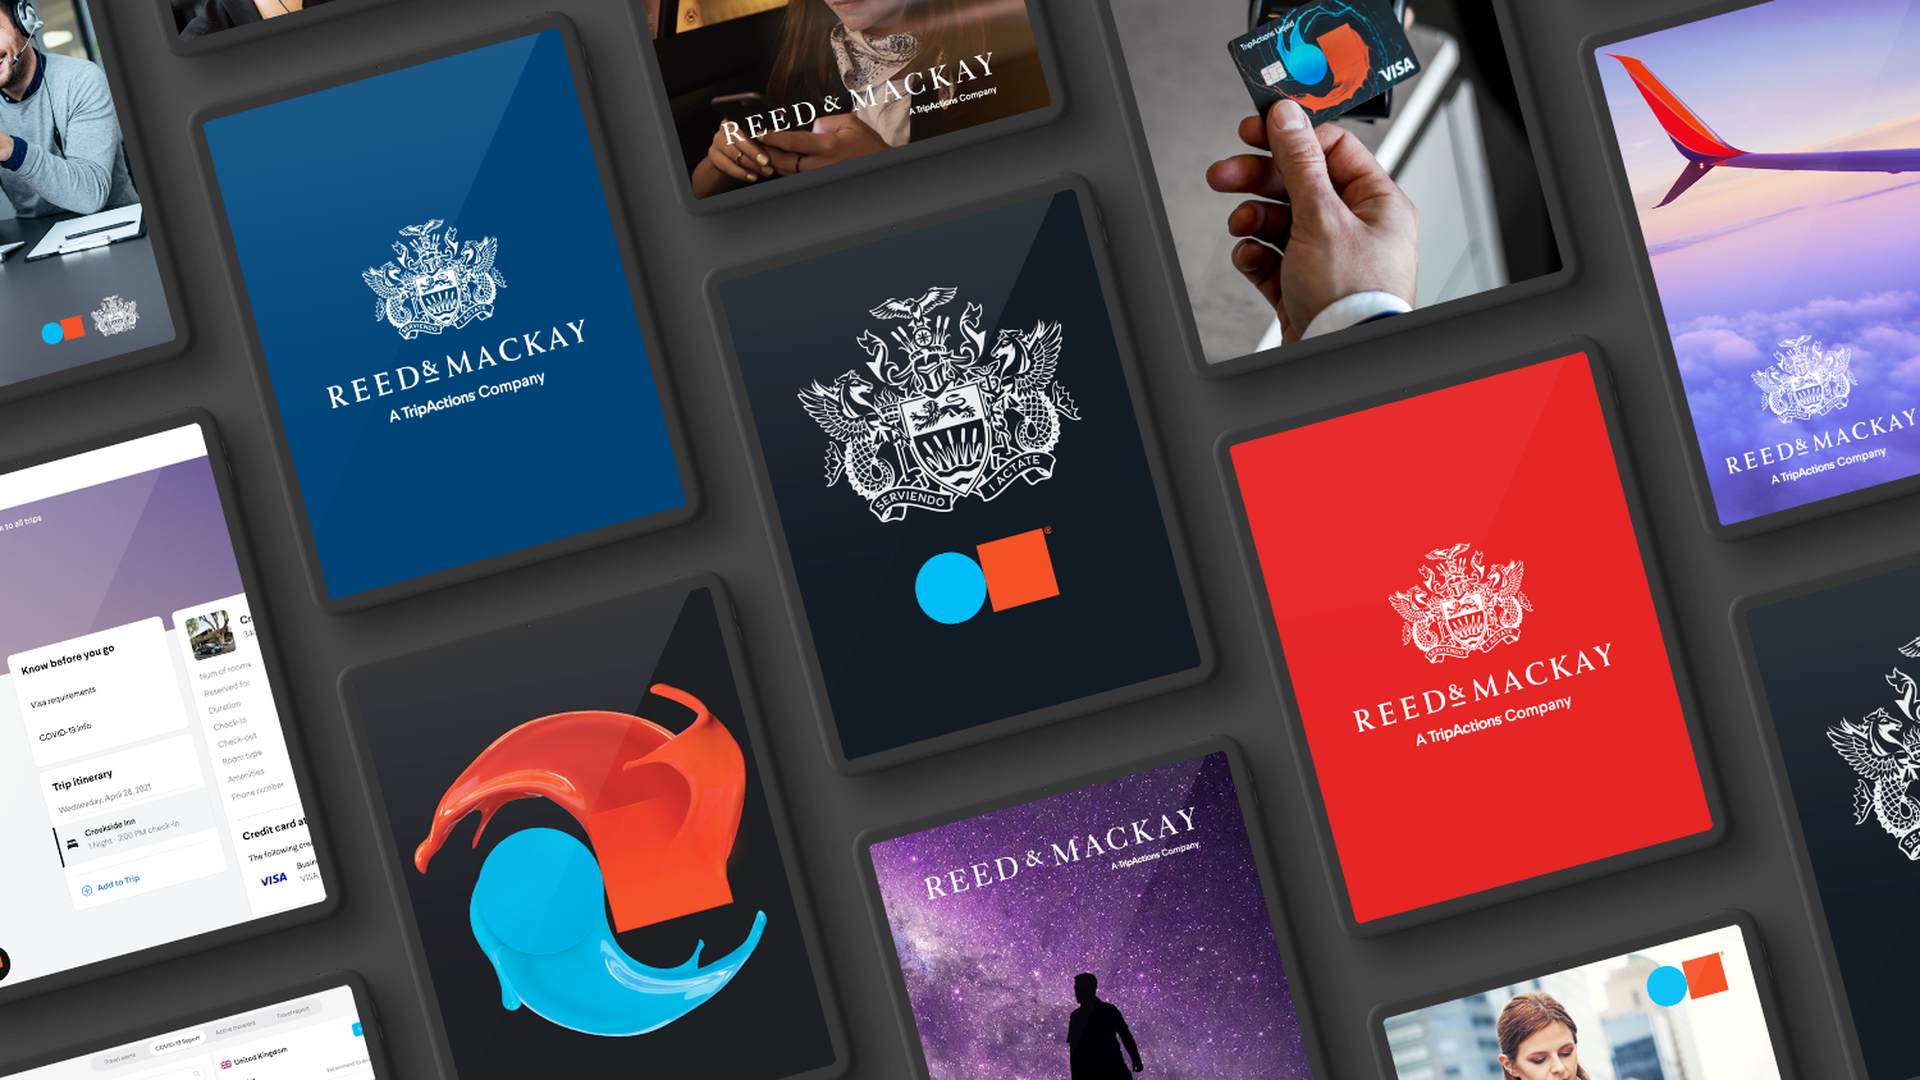 A photo illustration combining mobile screens with various stylings of the TripActions and Reed & Mackay logos.